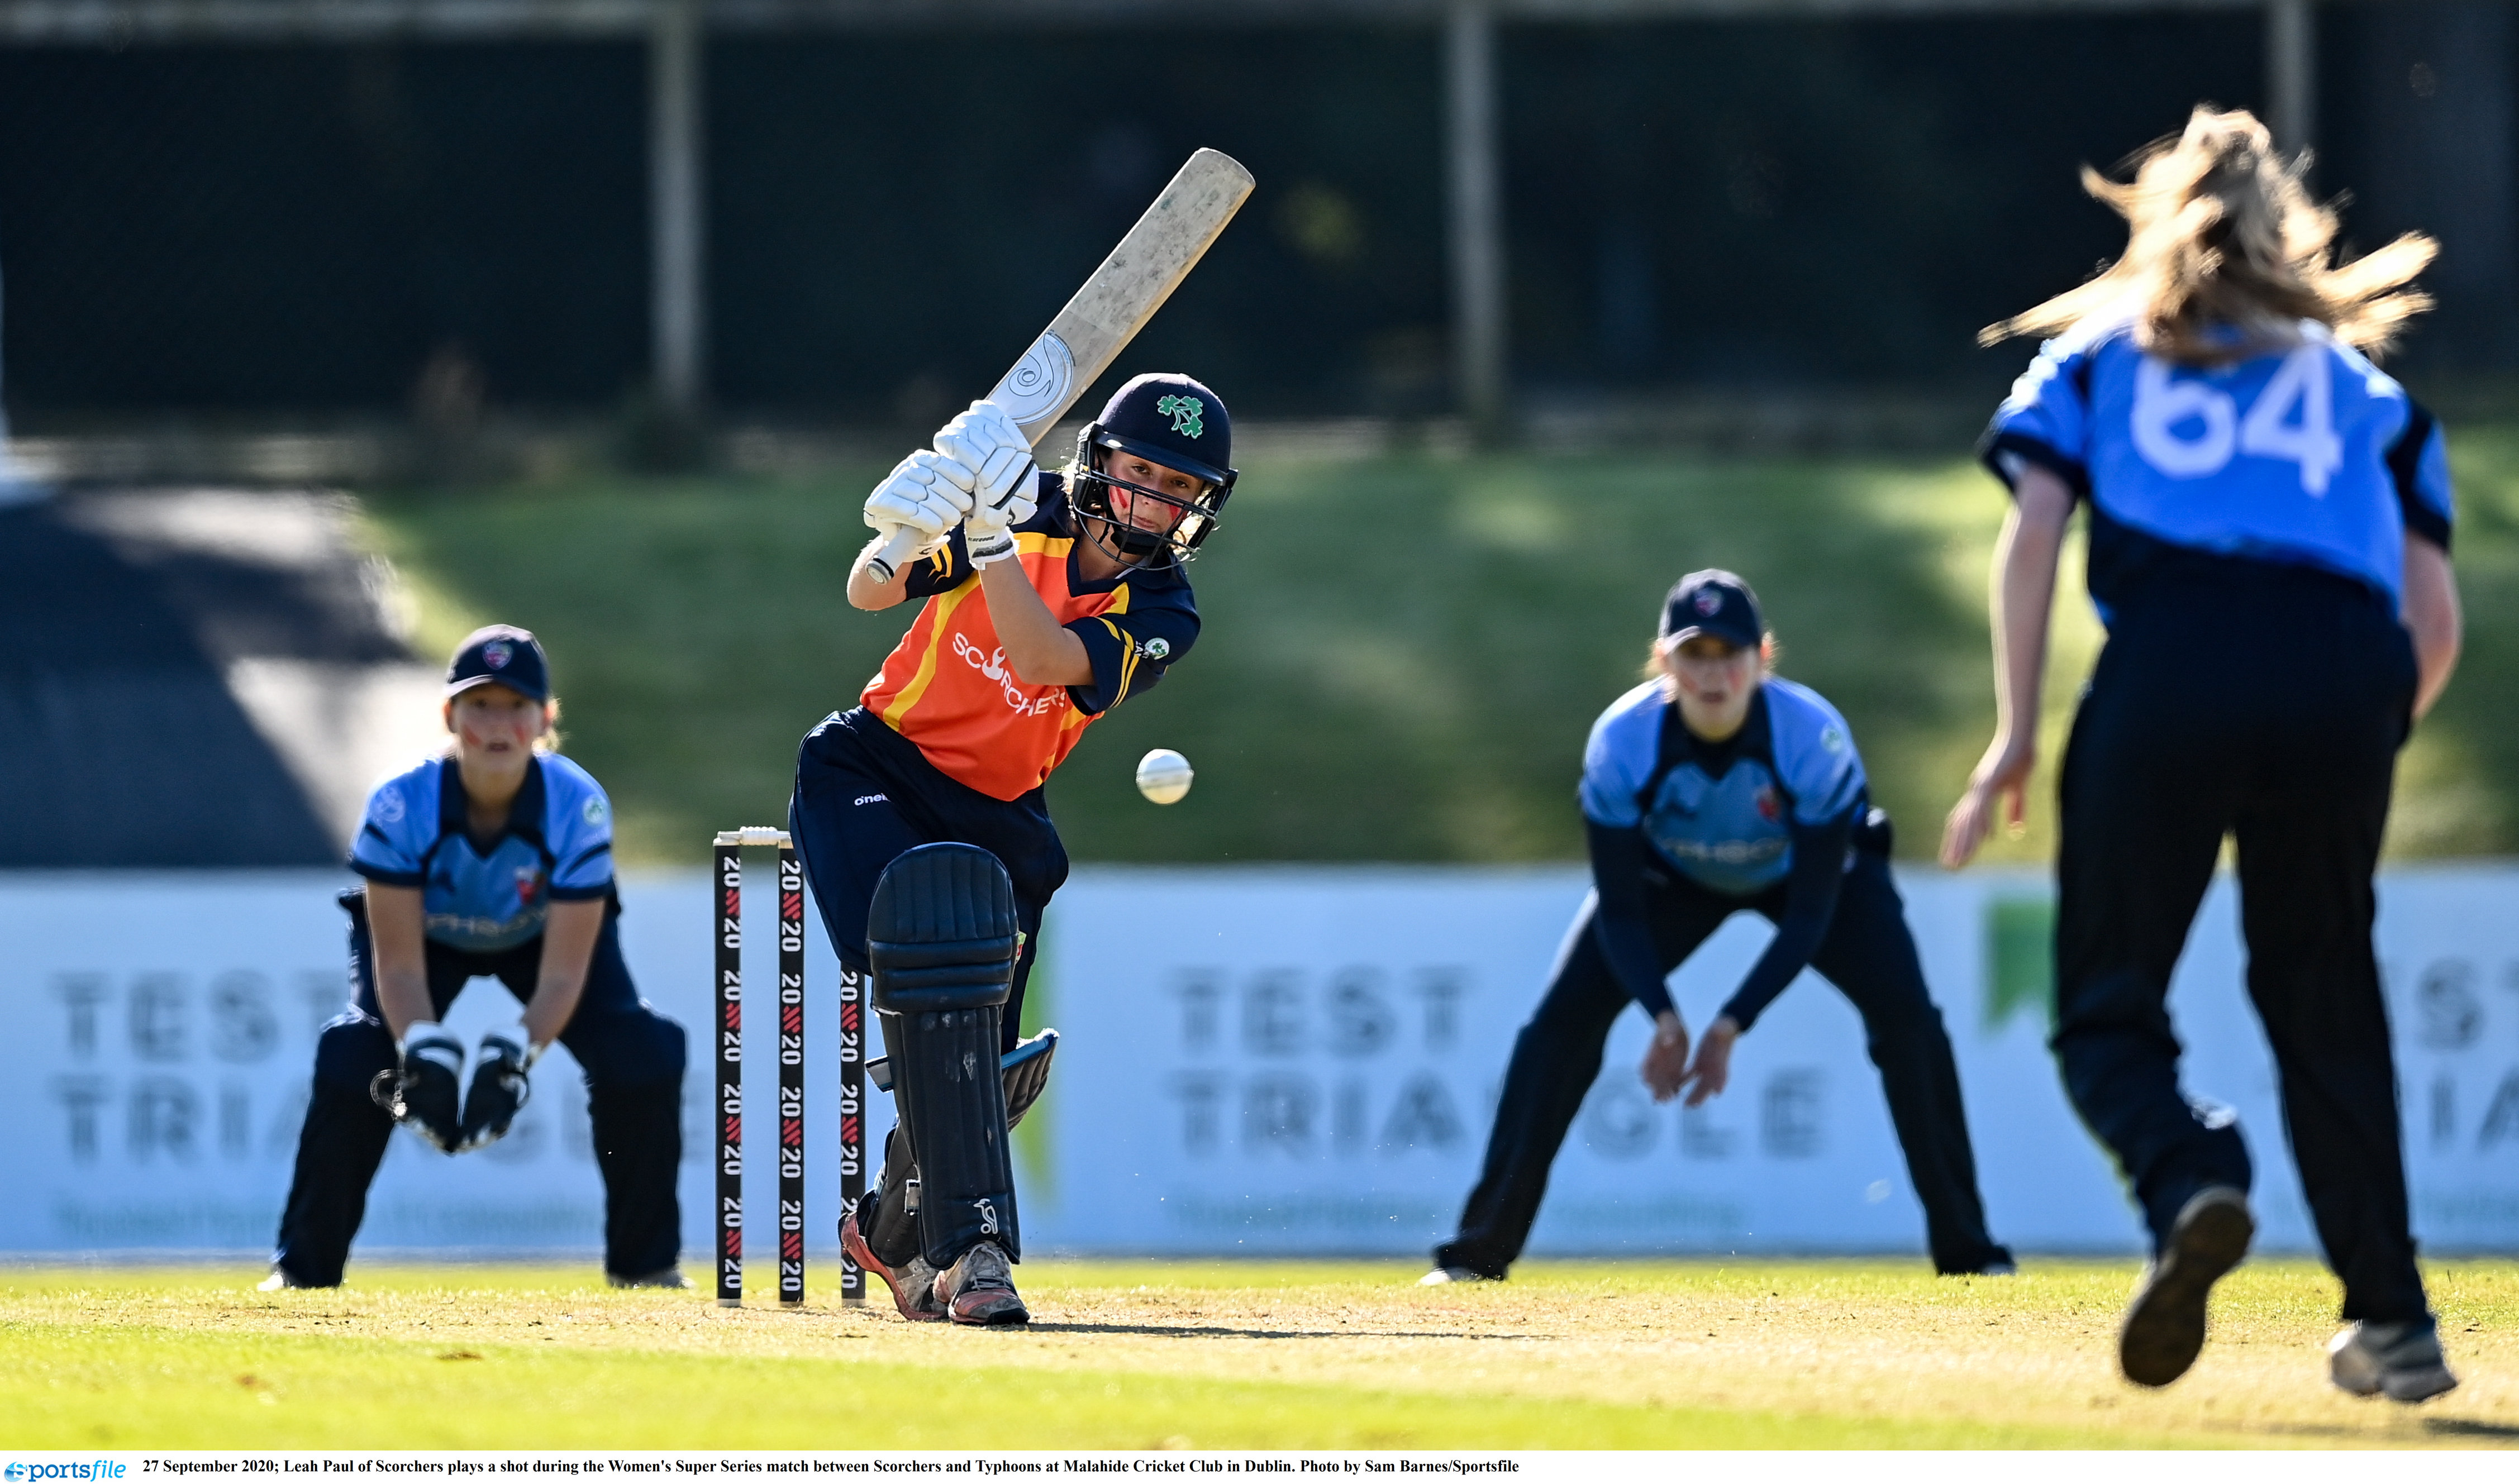 Cricket Ireland: Changes confirmed to Women’s Super Series squads ahead of competition start